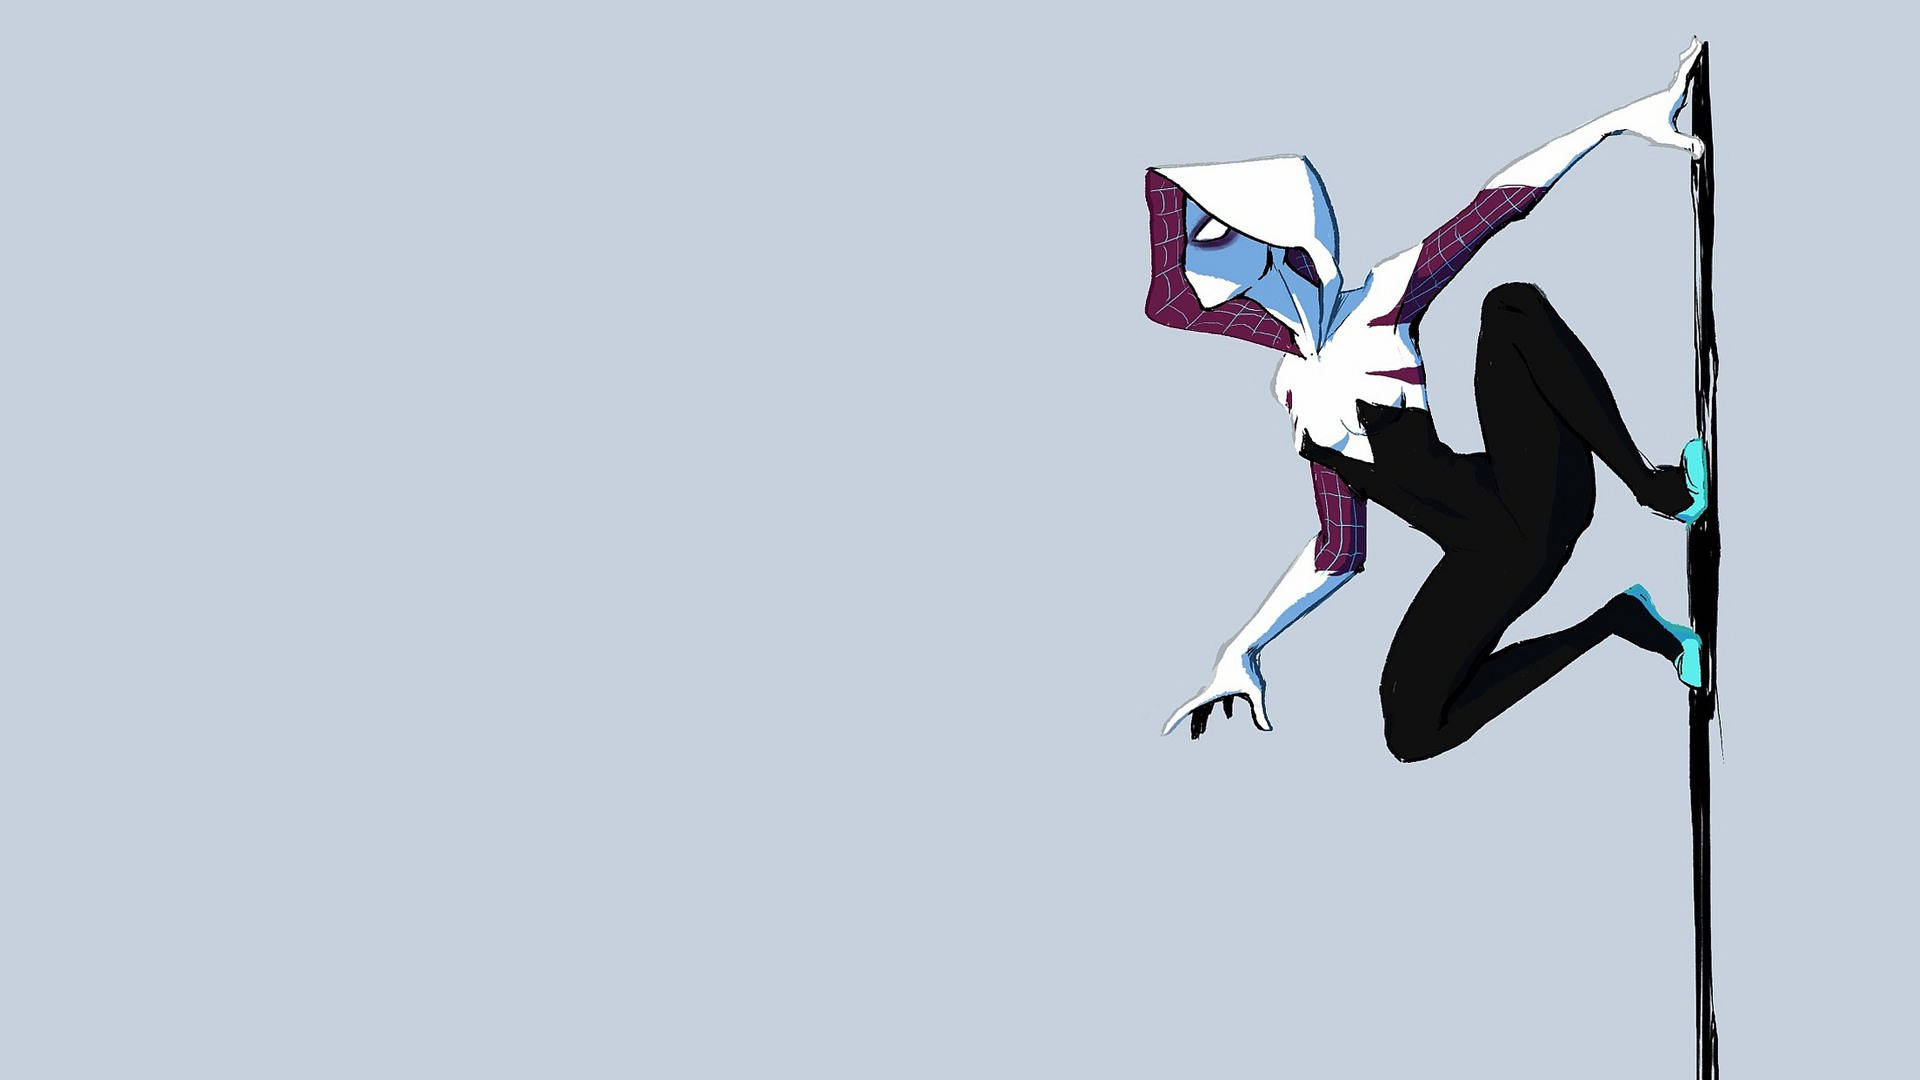 Spider Gwen Clinging On Wall Wallpaper